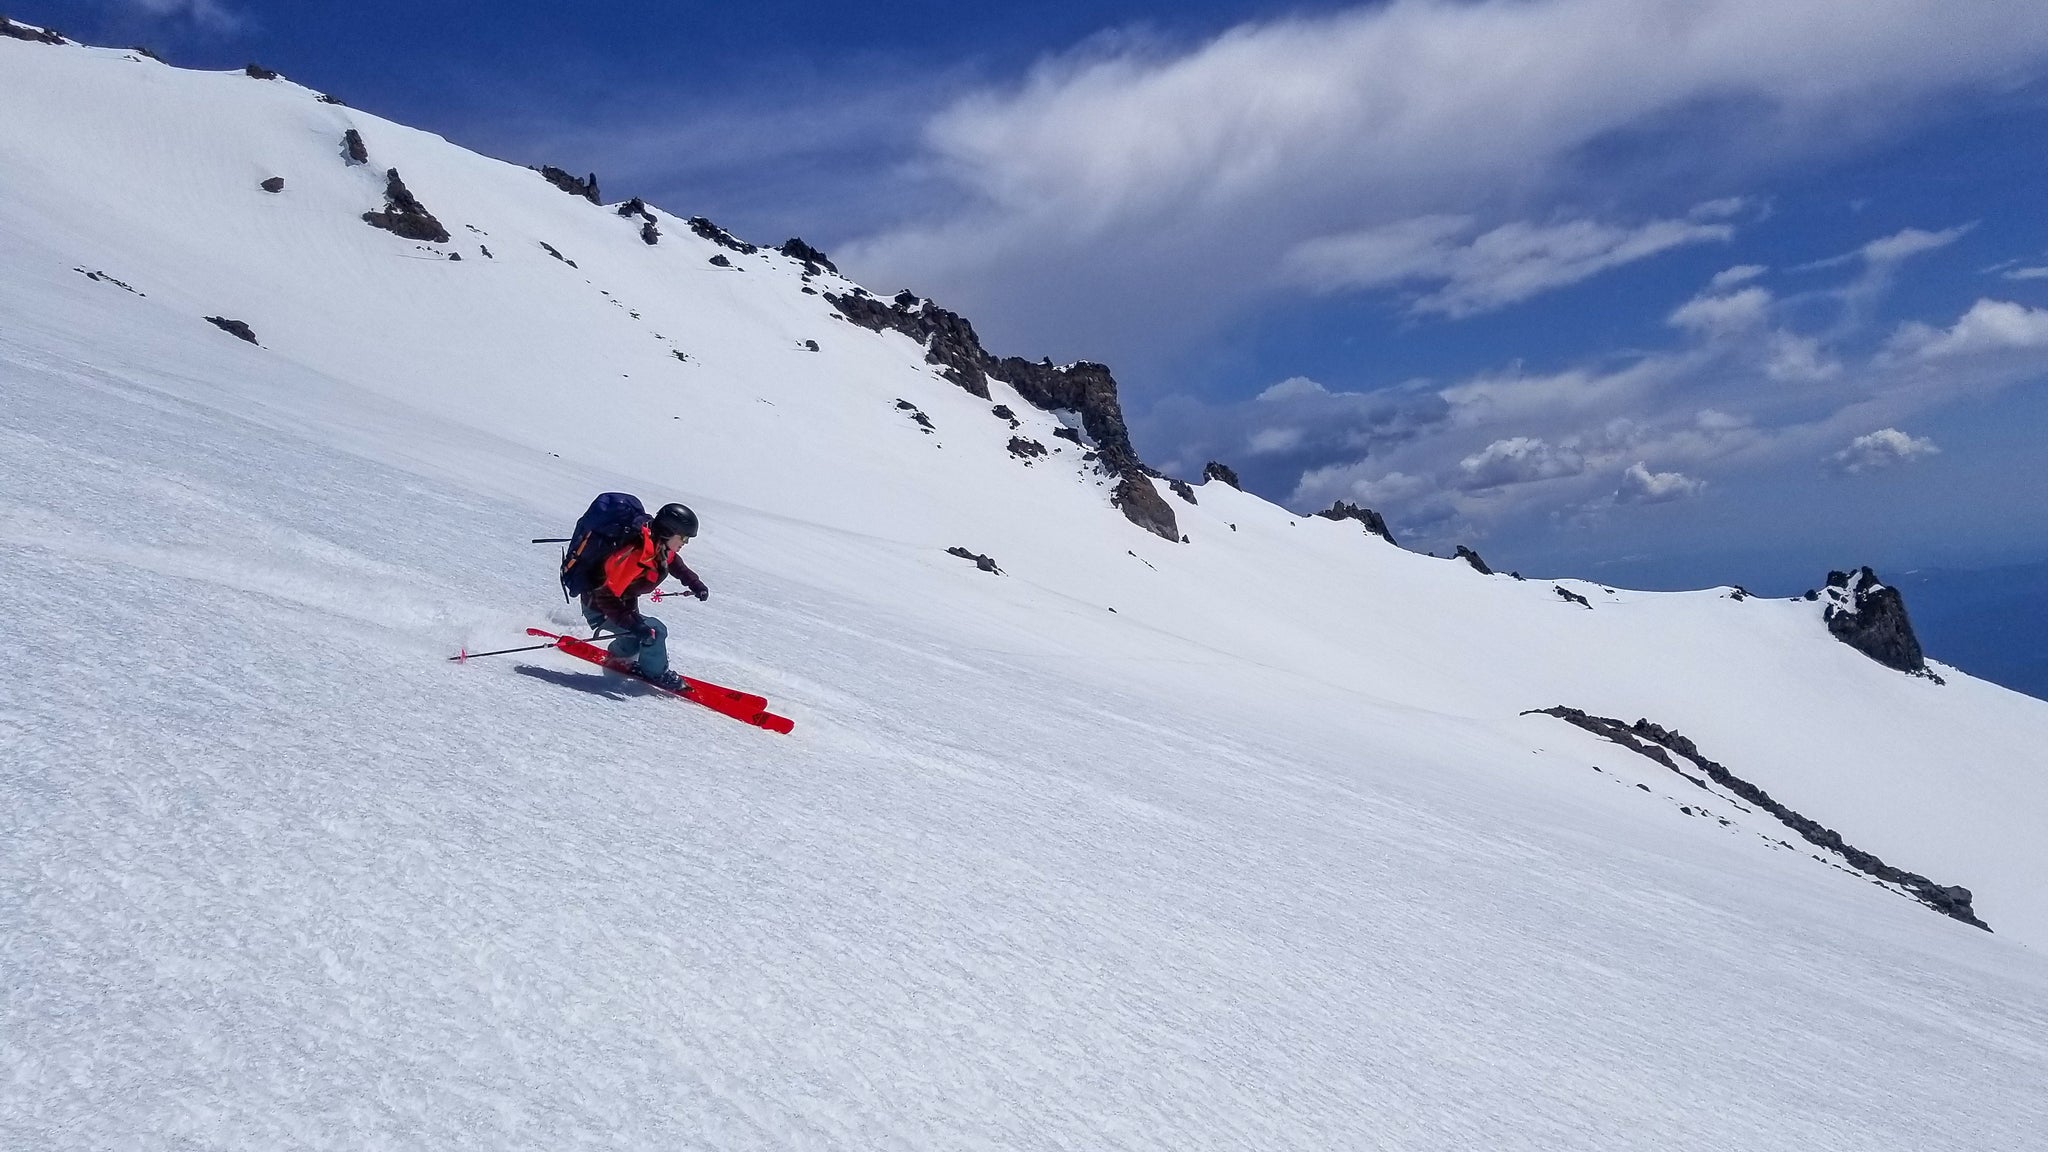 Ski Mountaineers approaching the summit of Mount Shasta